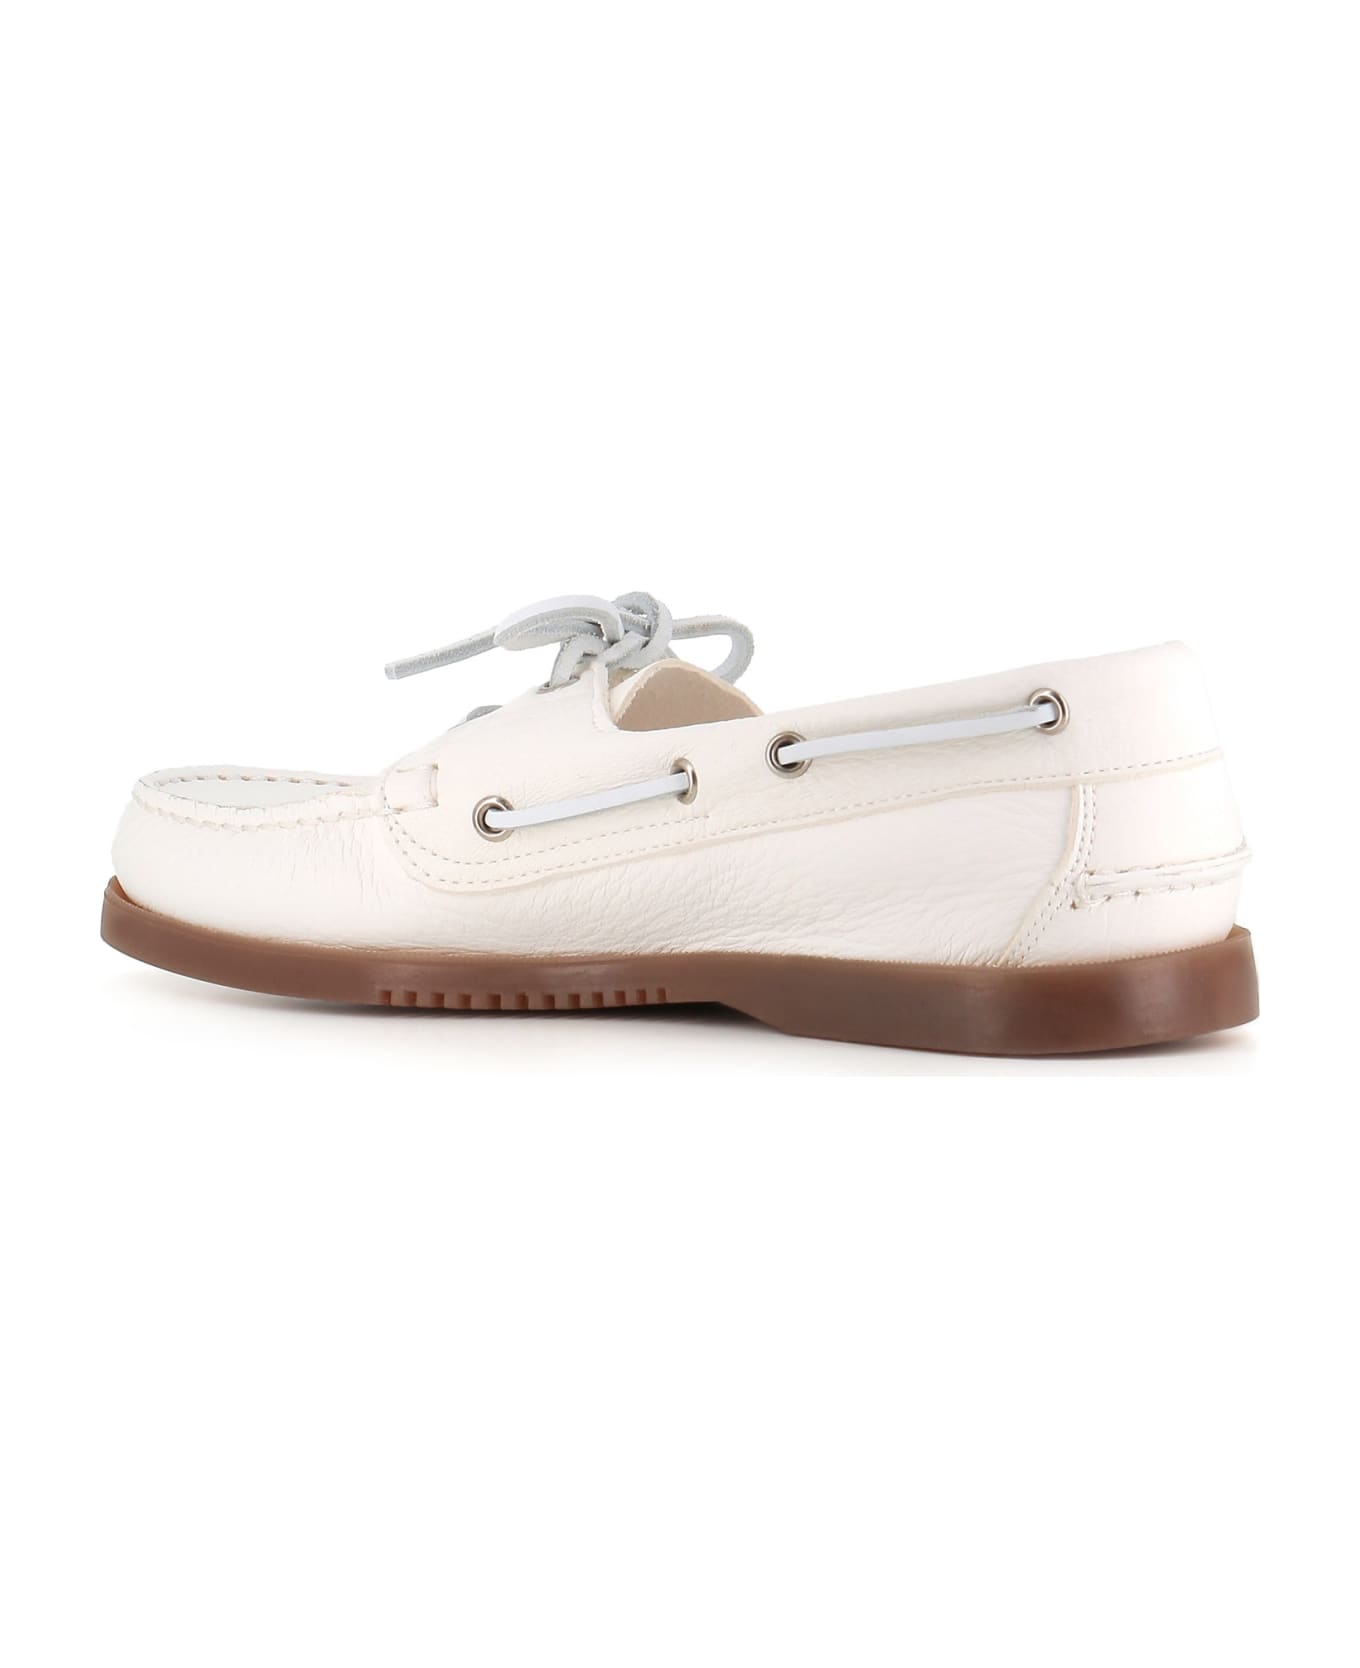 Paraboot Loafer Barth - White